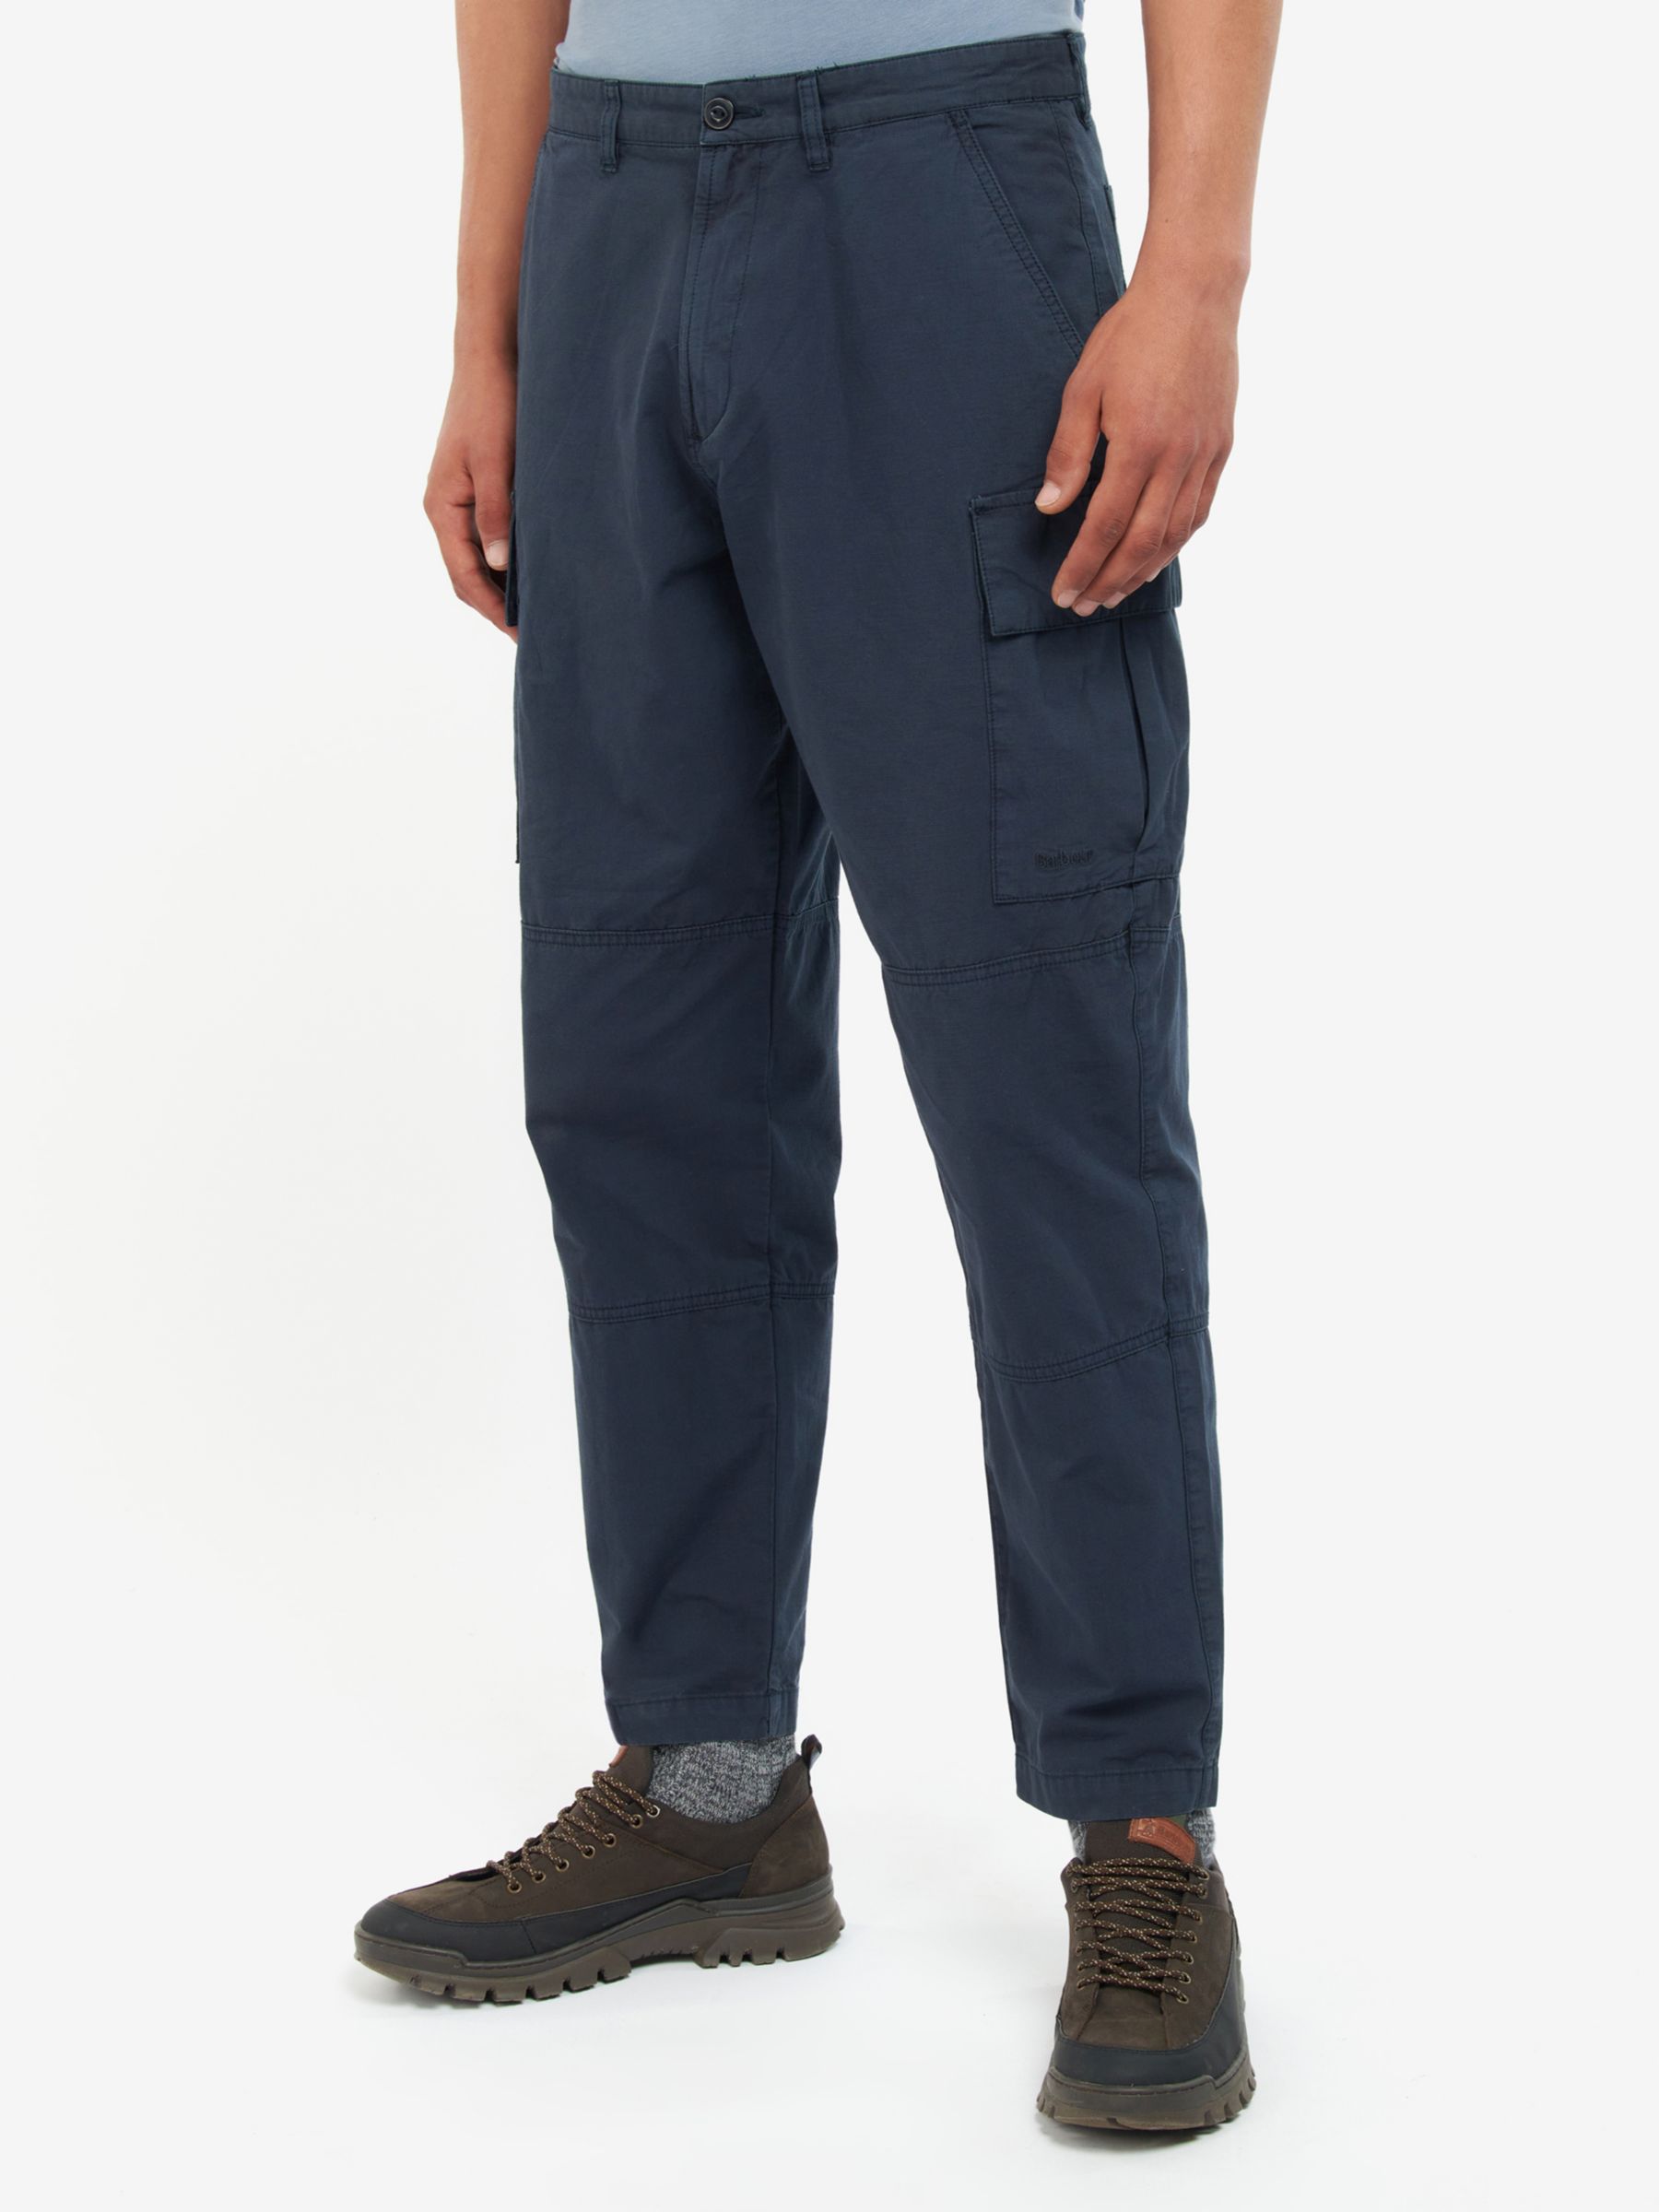 Barbour Essential Ripstop Cargo Trousers, Navy, 30